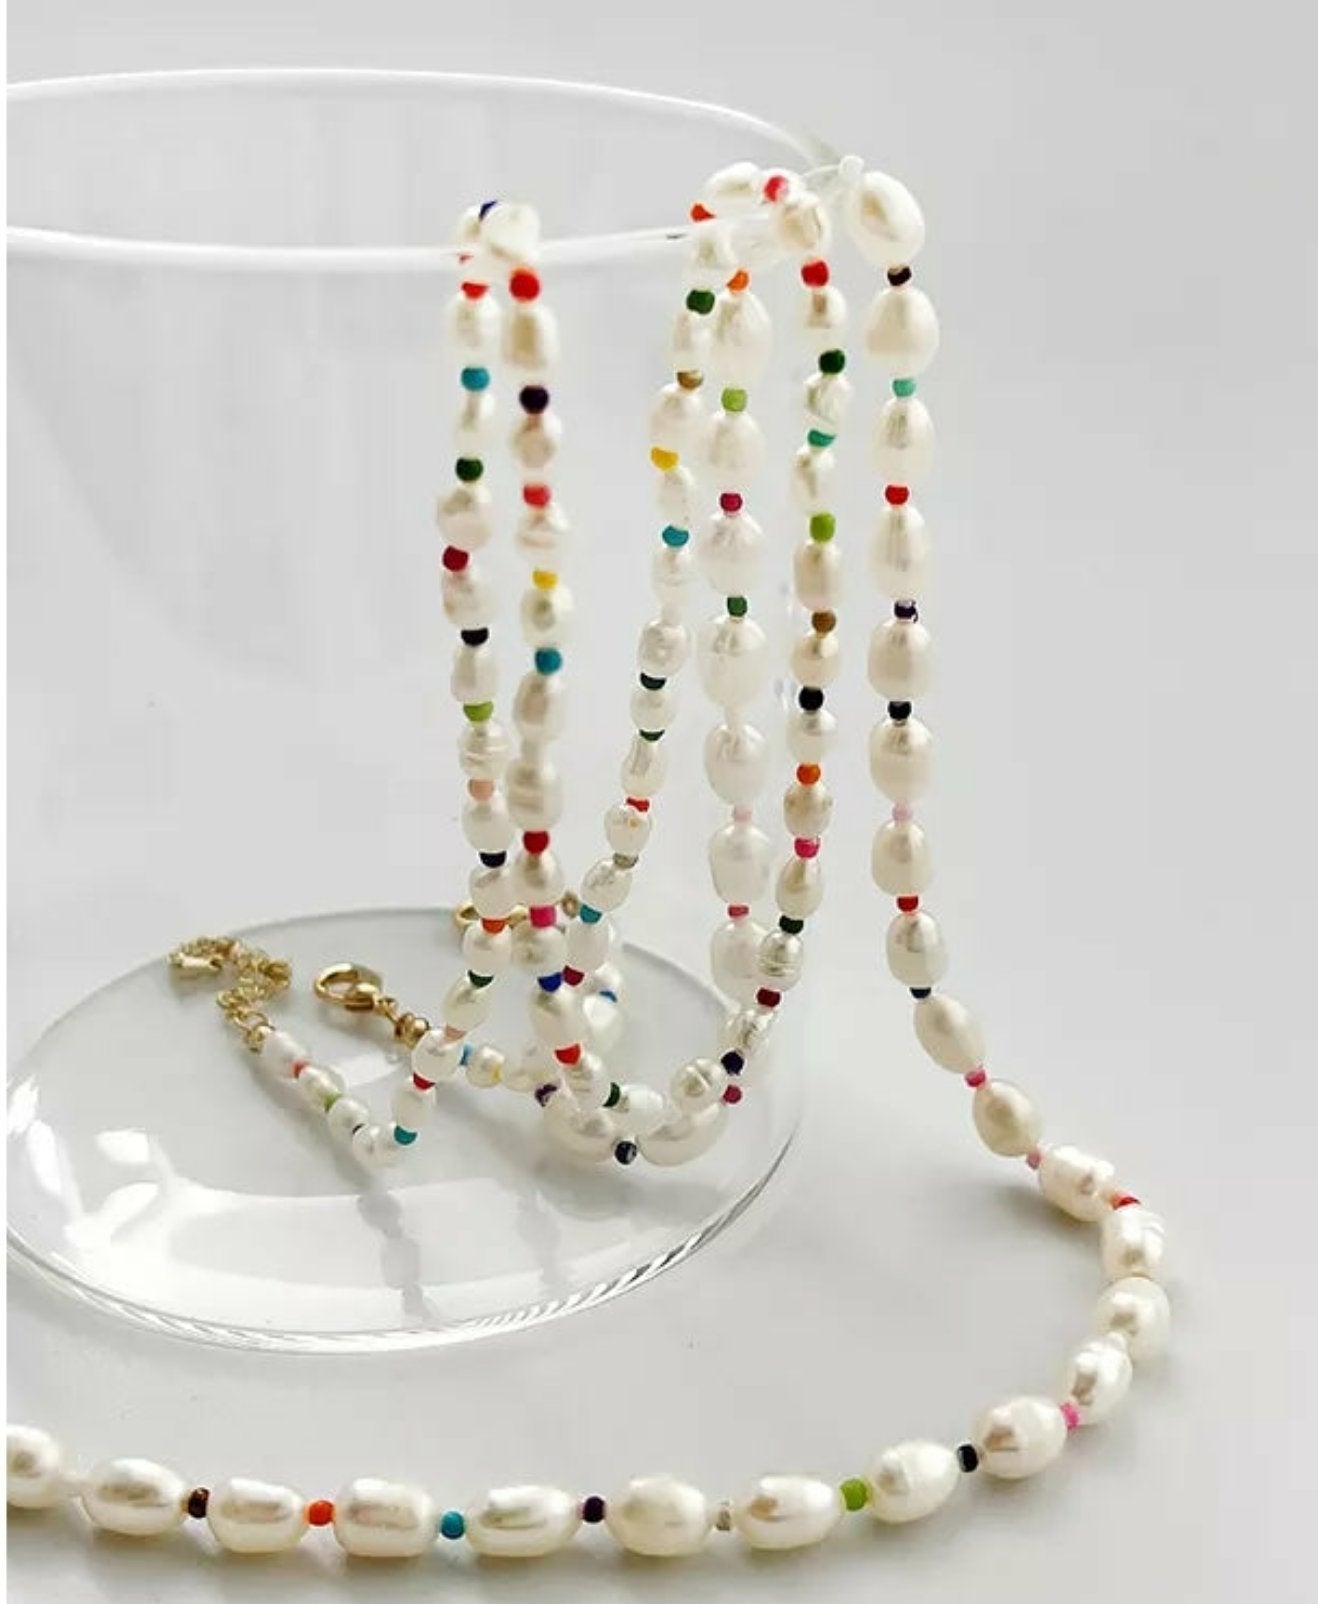 Colorfull Pearl Necklace